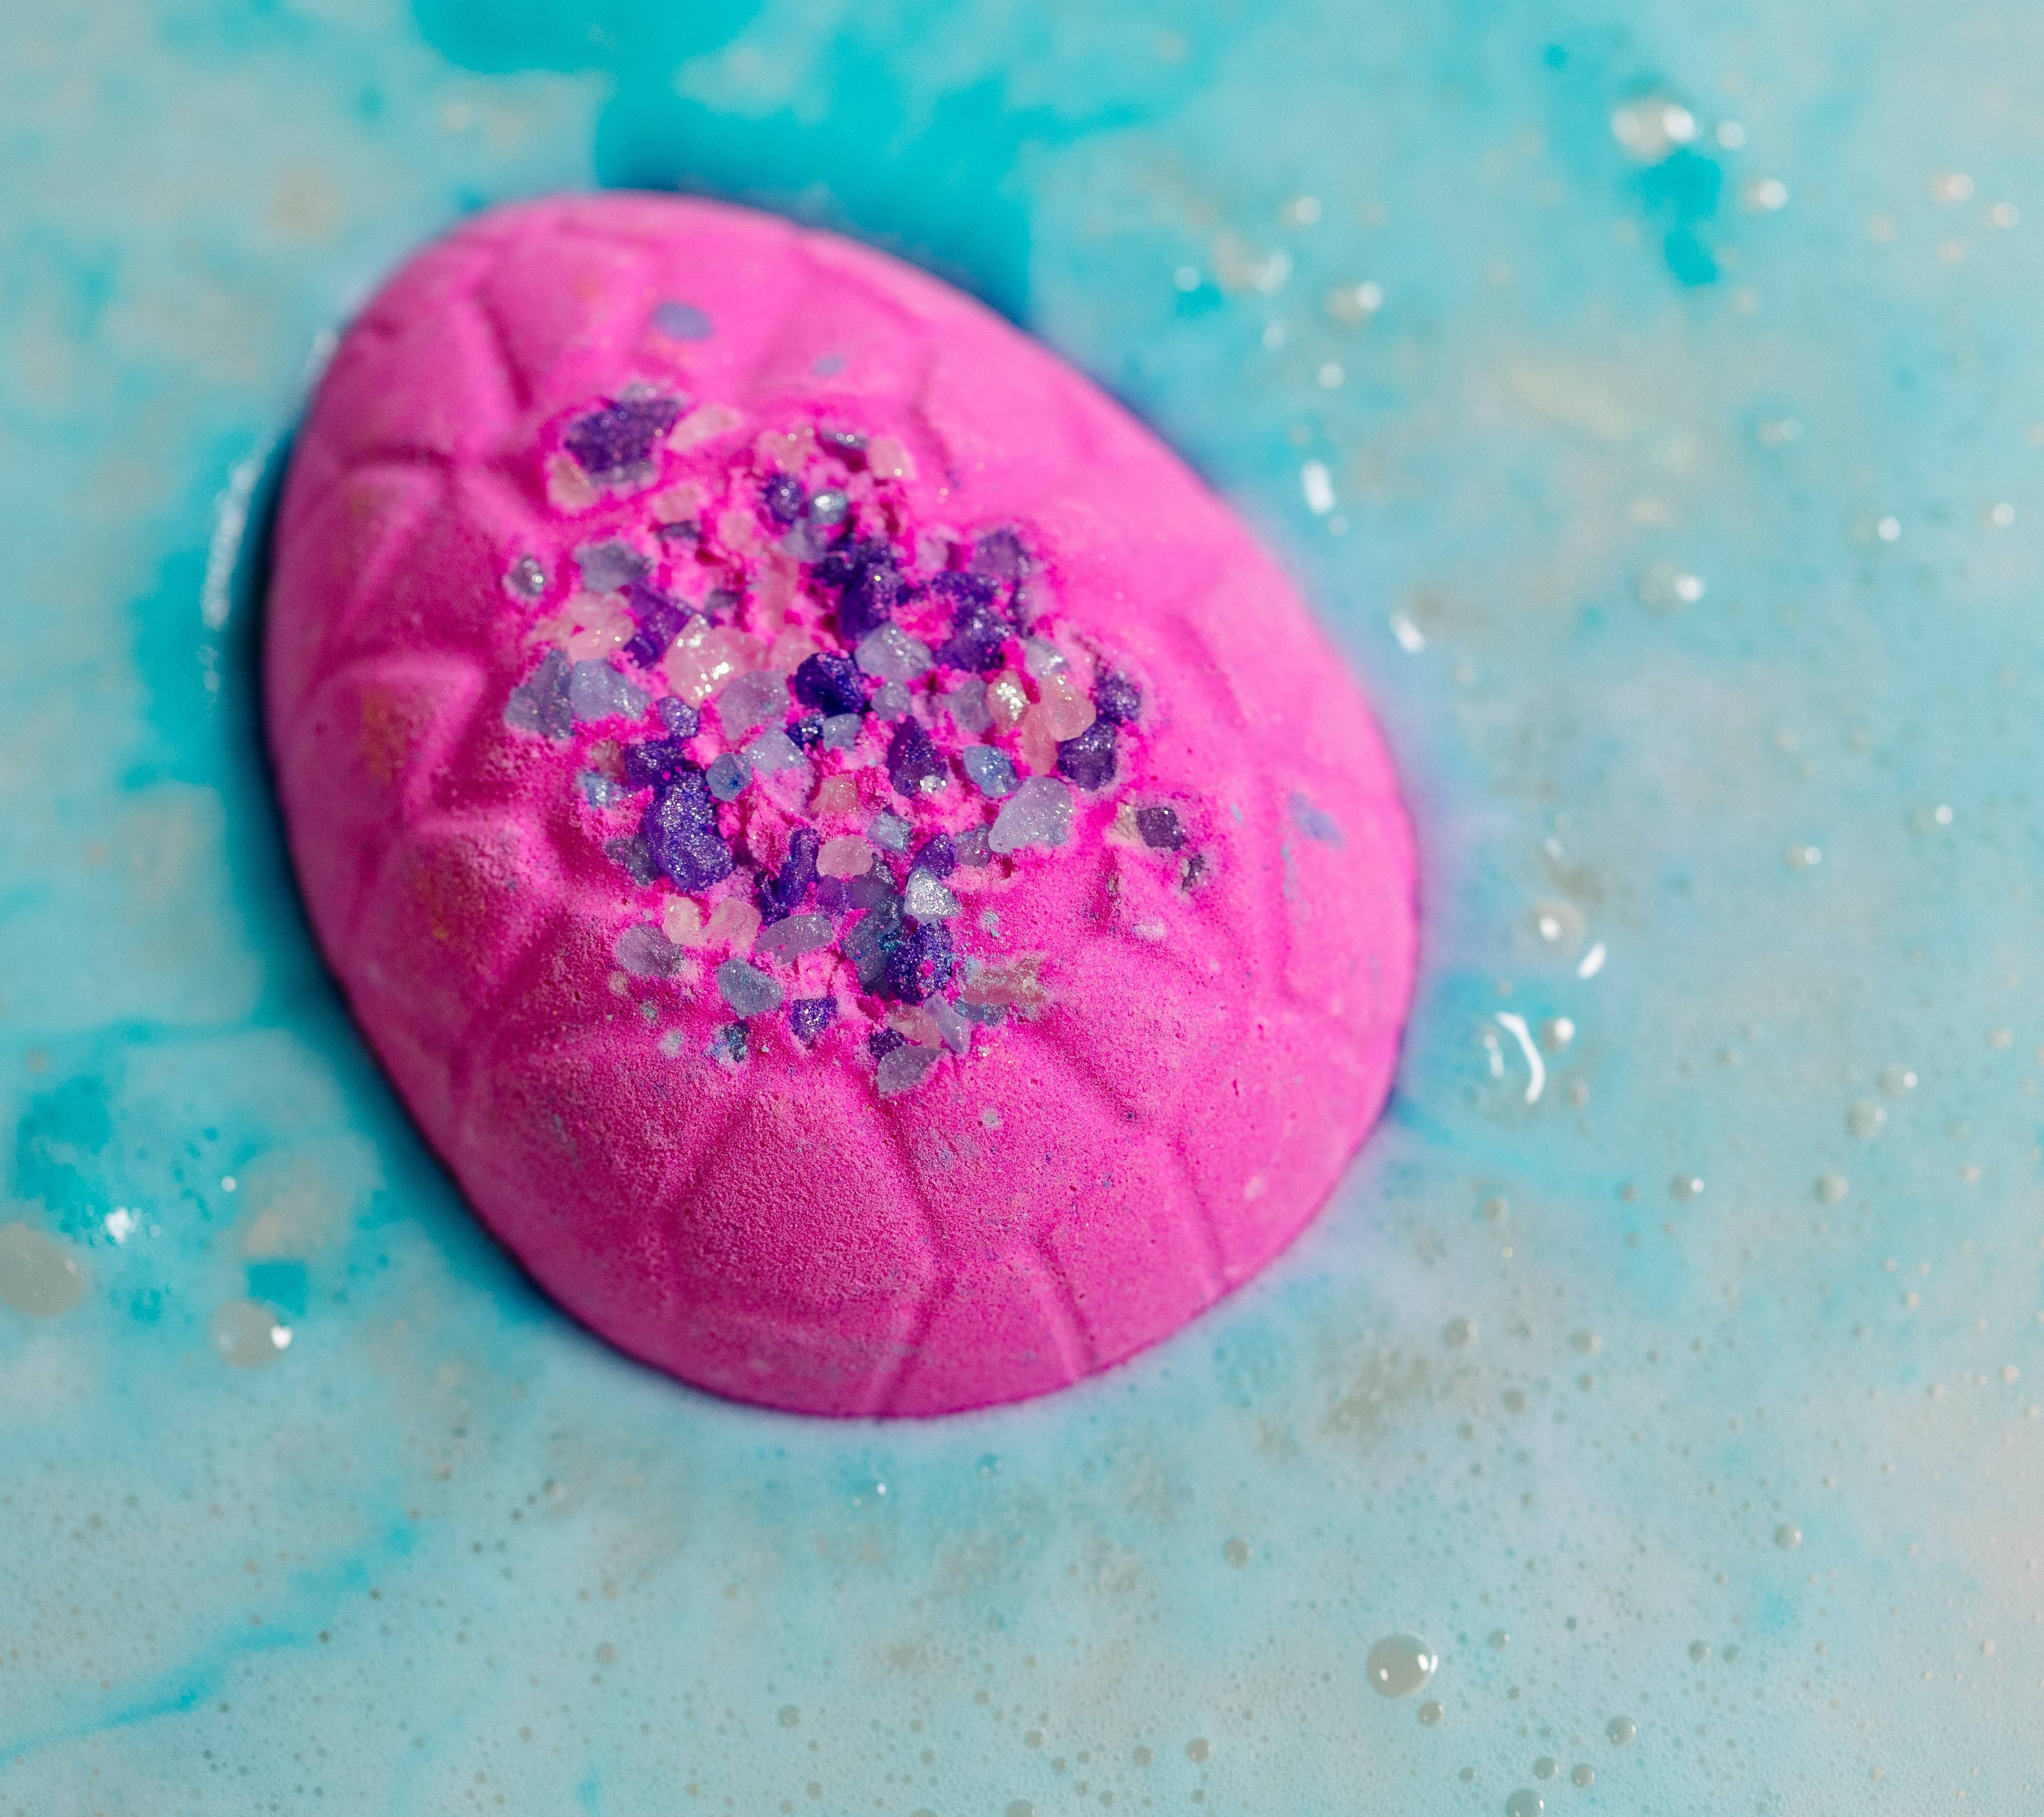 The bath bomb floats pink side up in baby blue coloured fizzing water, showing off the purple coloured sea salt embedded. 